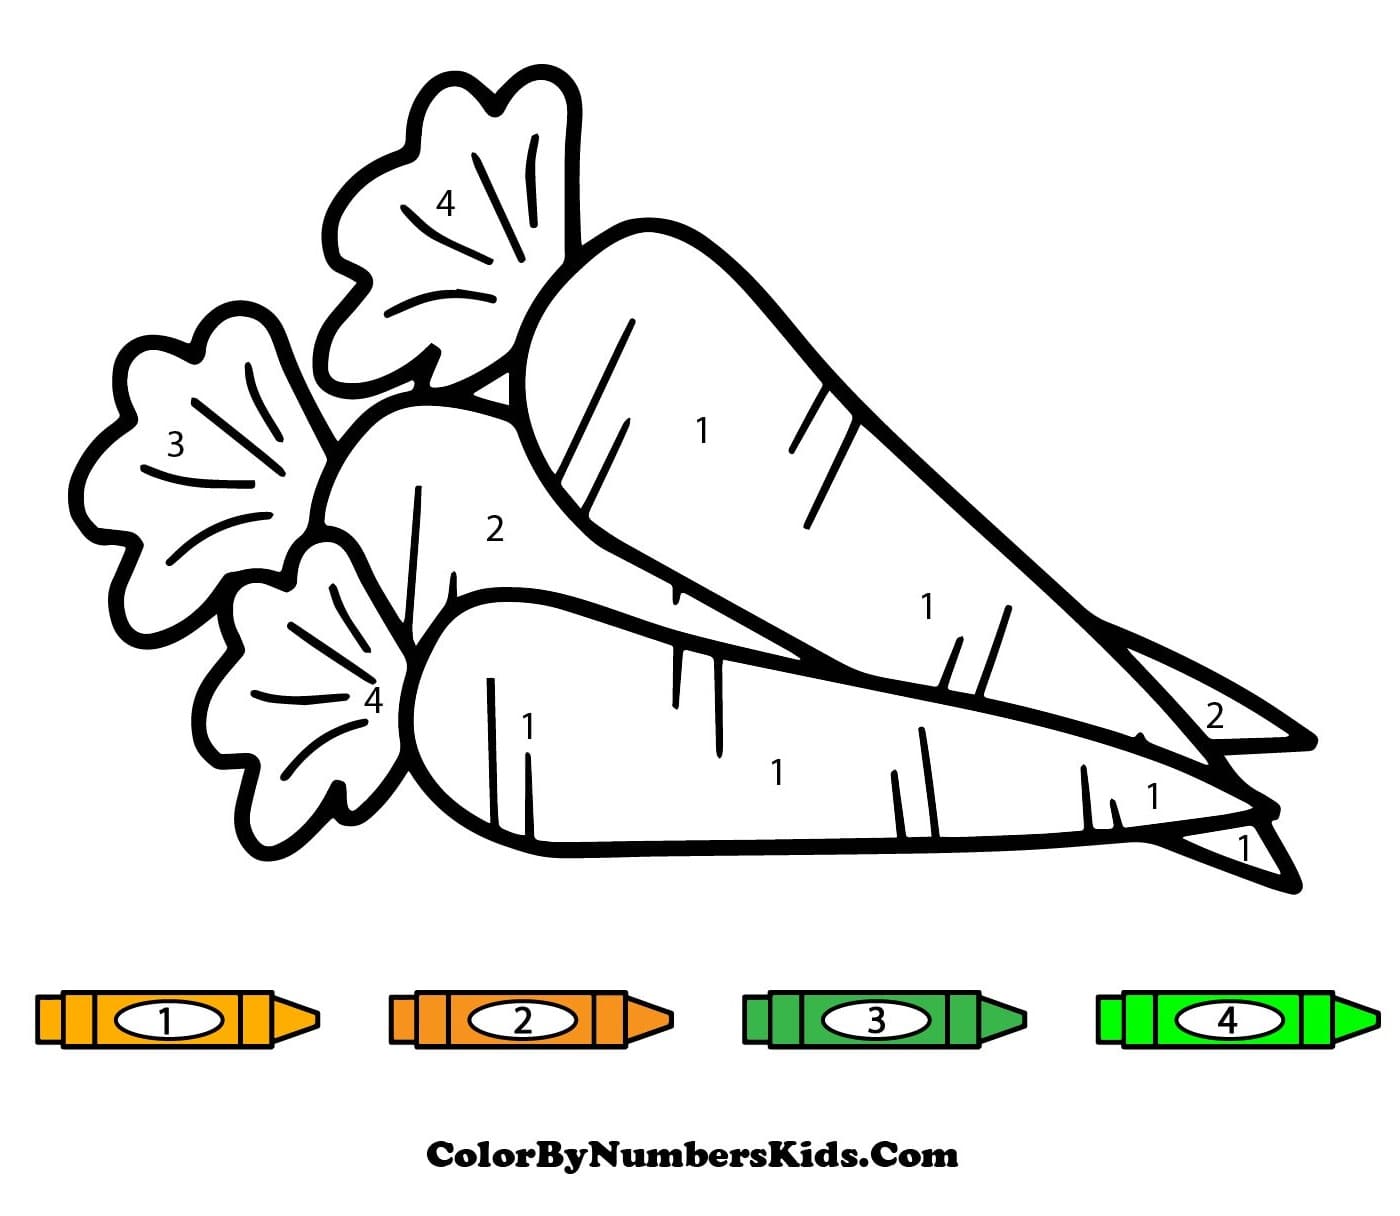 Three Carrots Color By Number